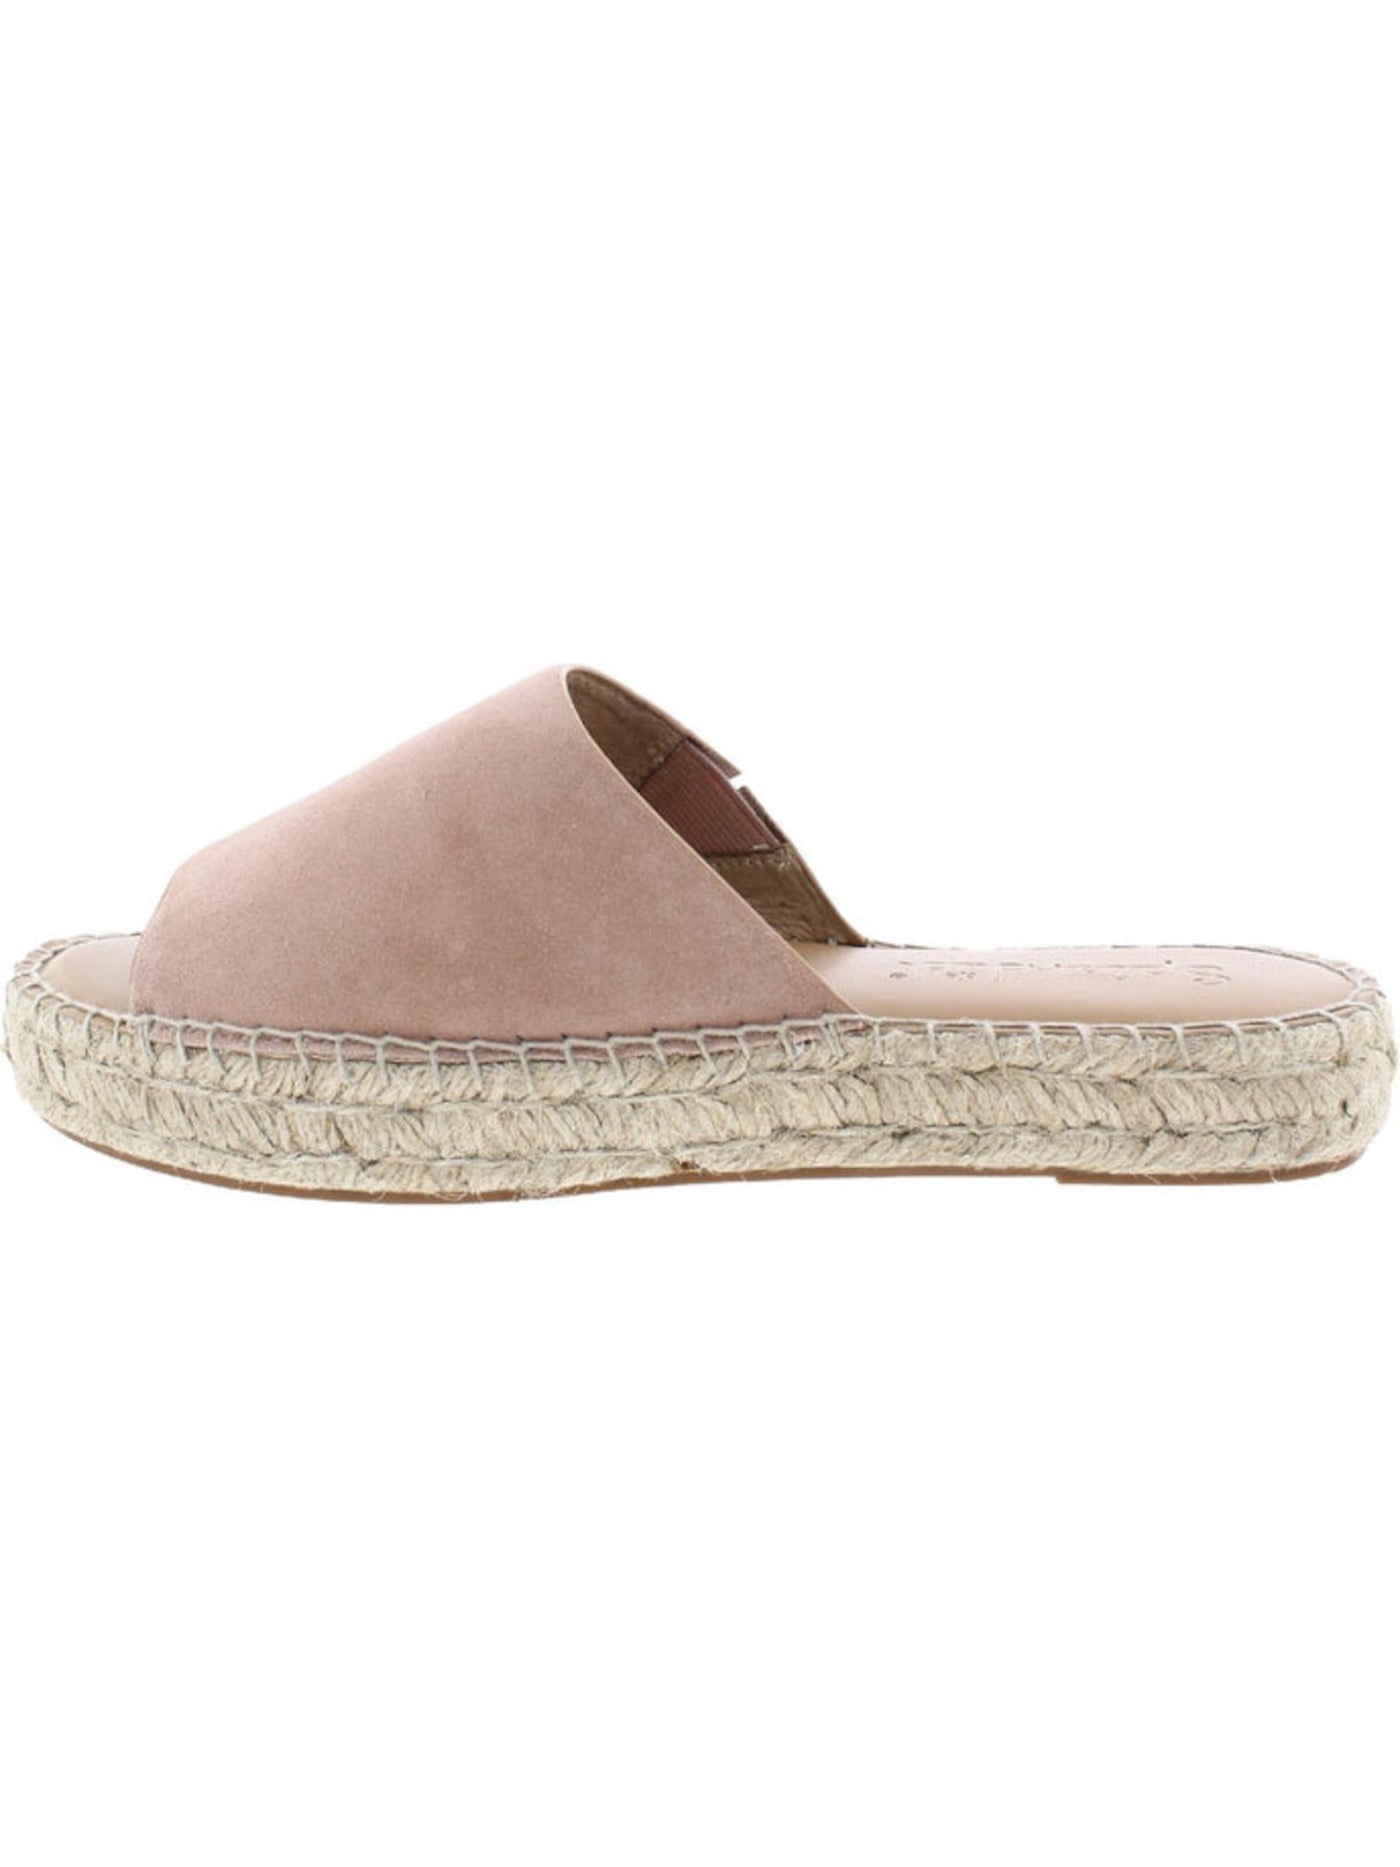 SPLENDID Womens Beige Beef Rolled Cushioned Goring Maia Round Toe Slip On Leather Espadrille Shoes 7 M